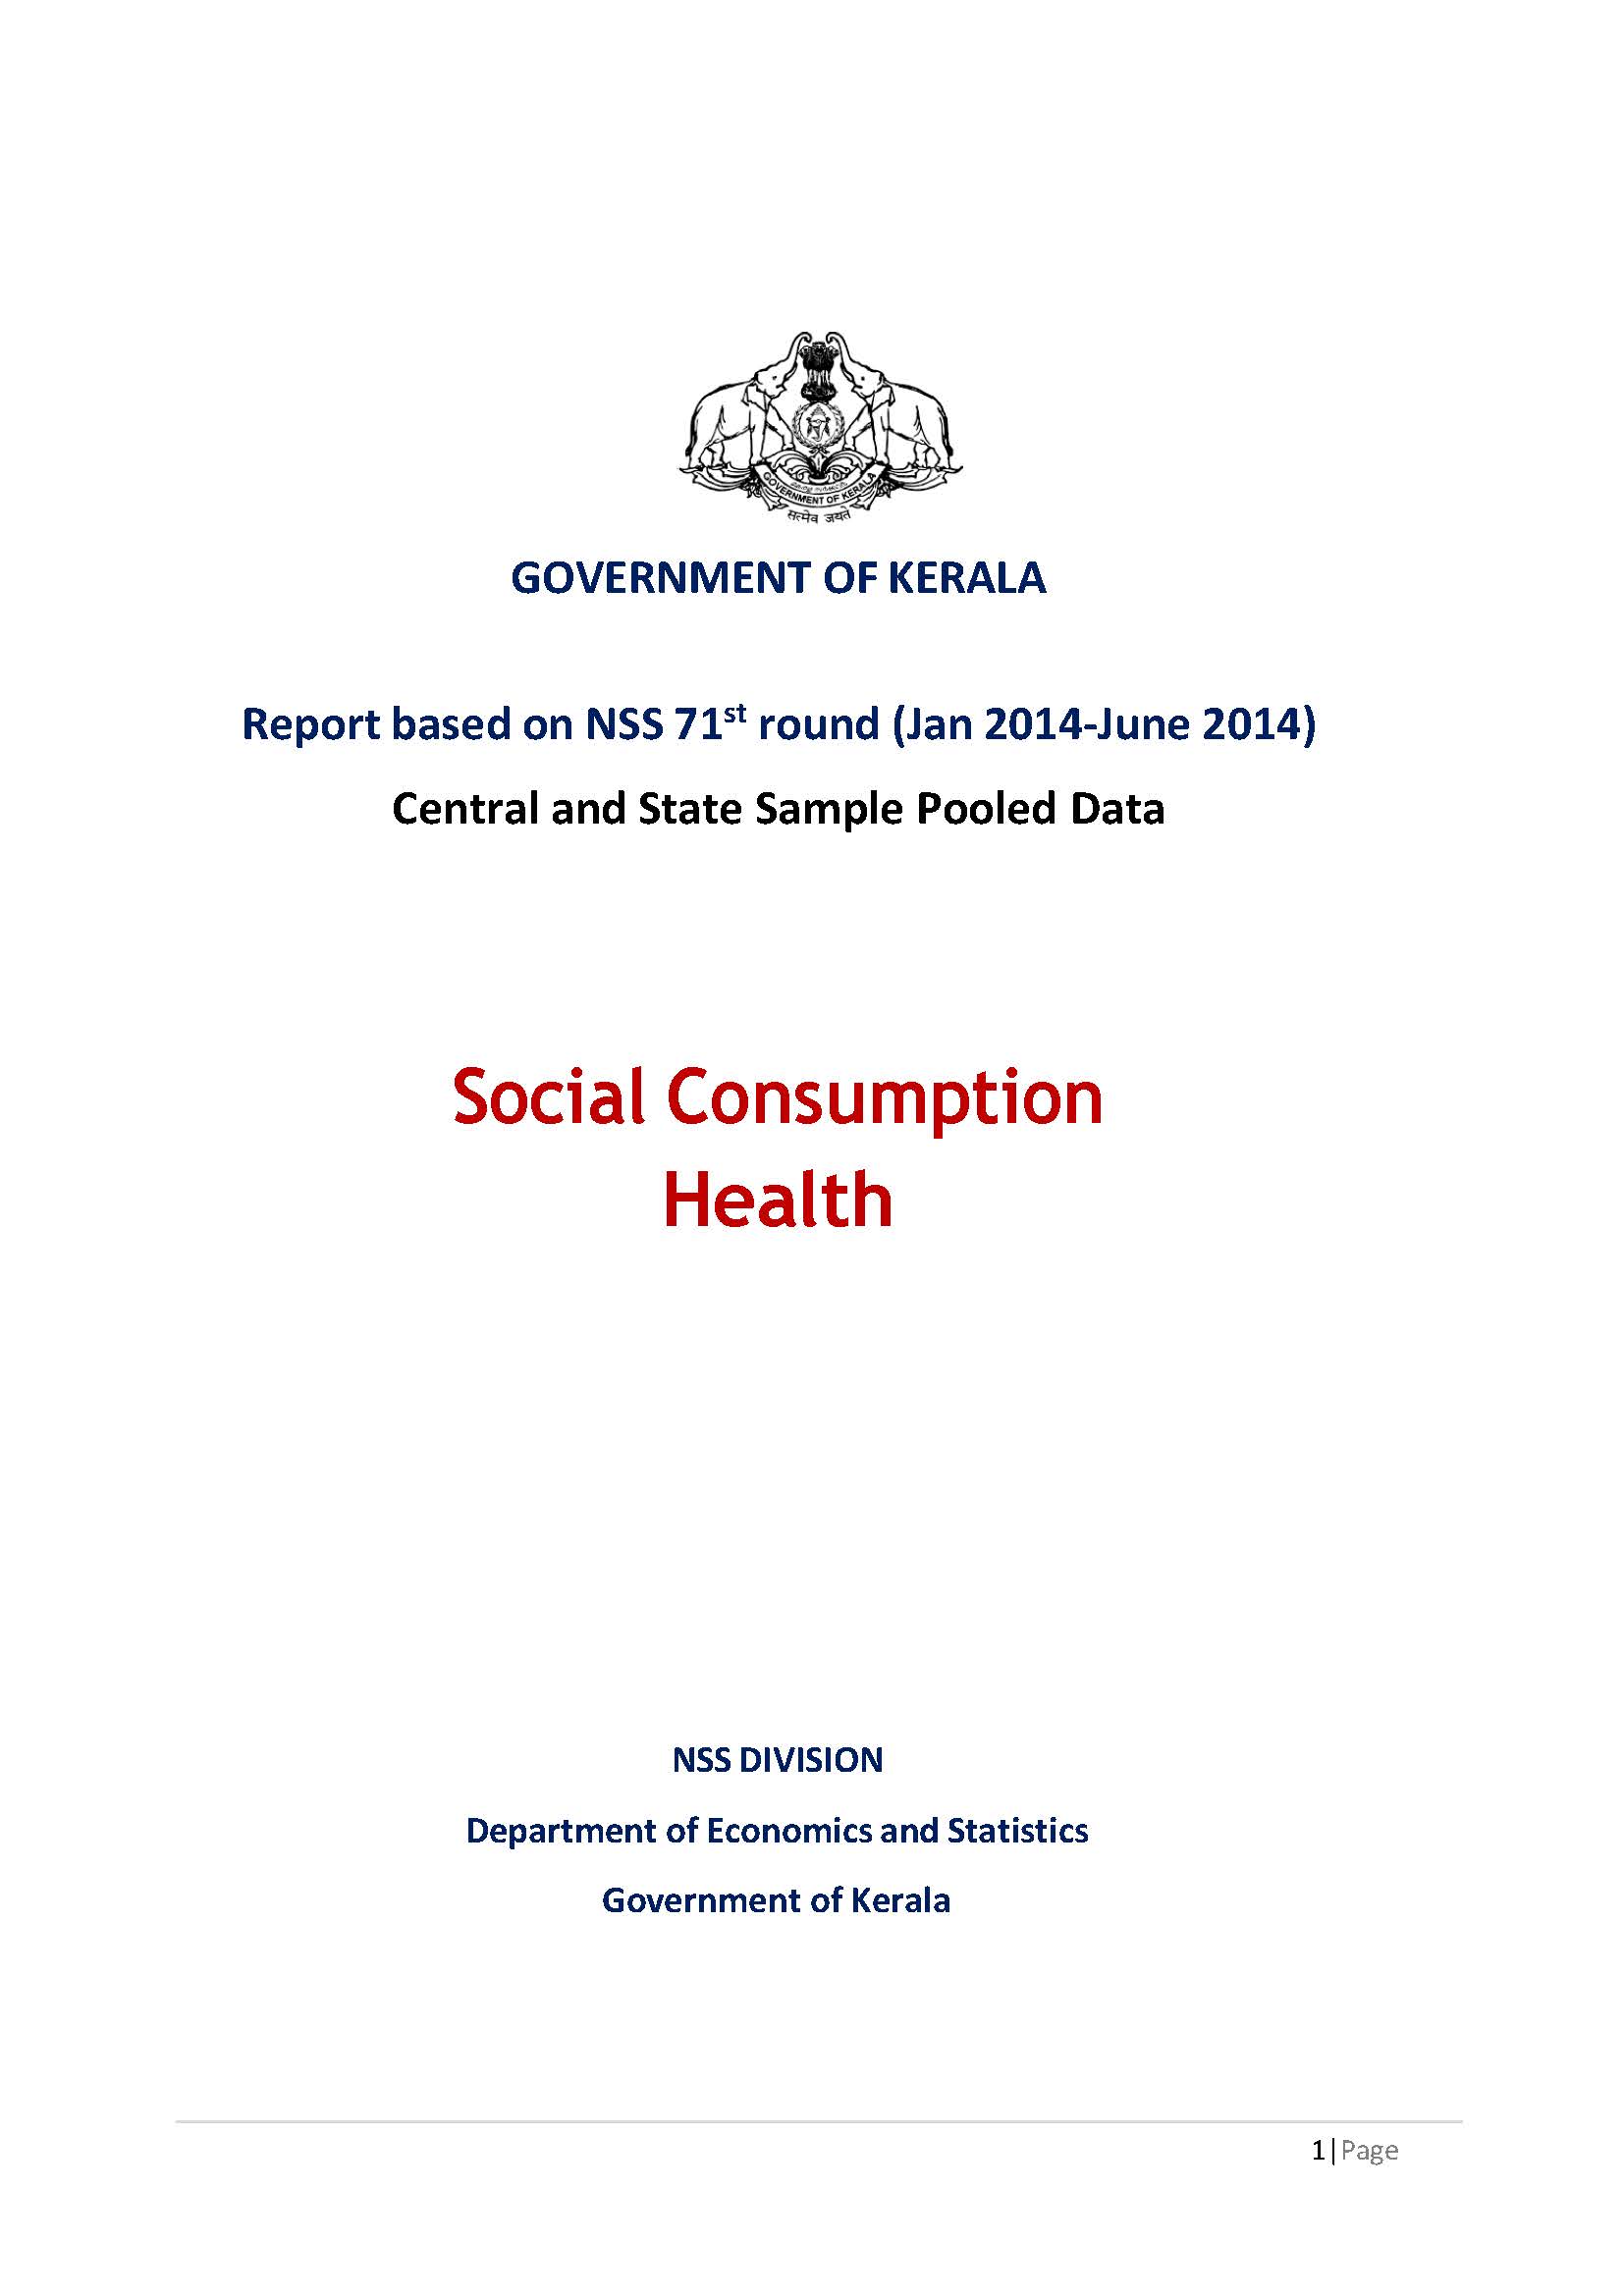 NSS 71st round - Social Consumption Health